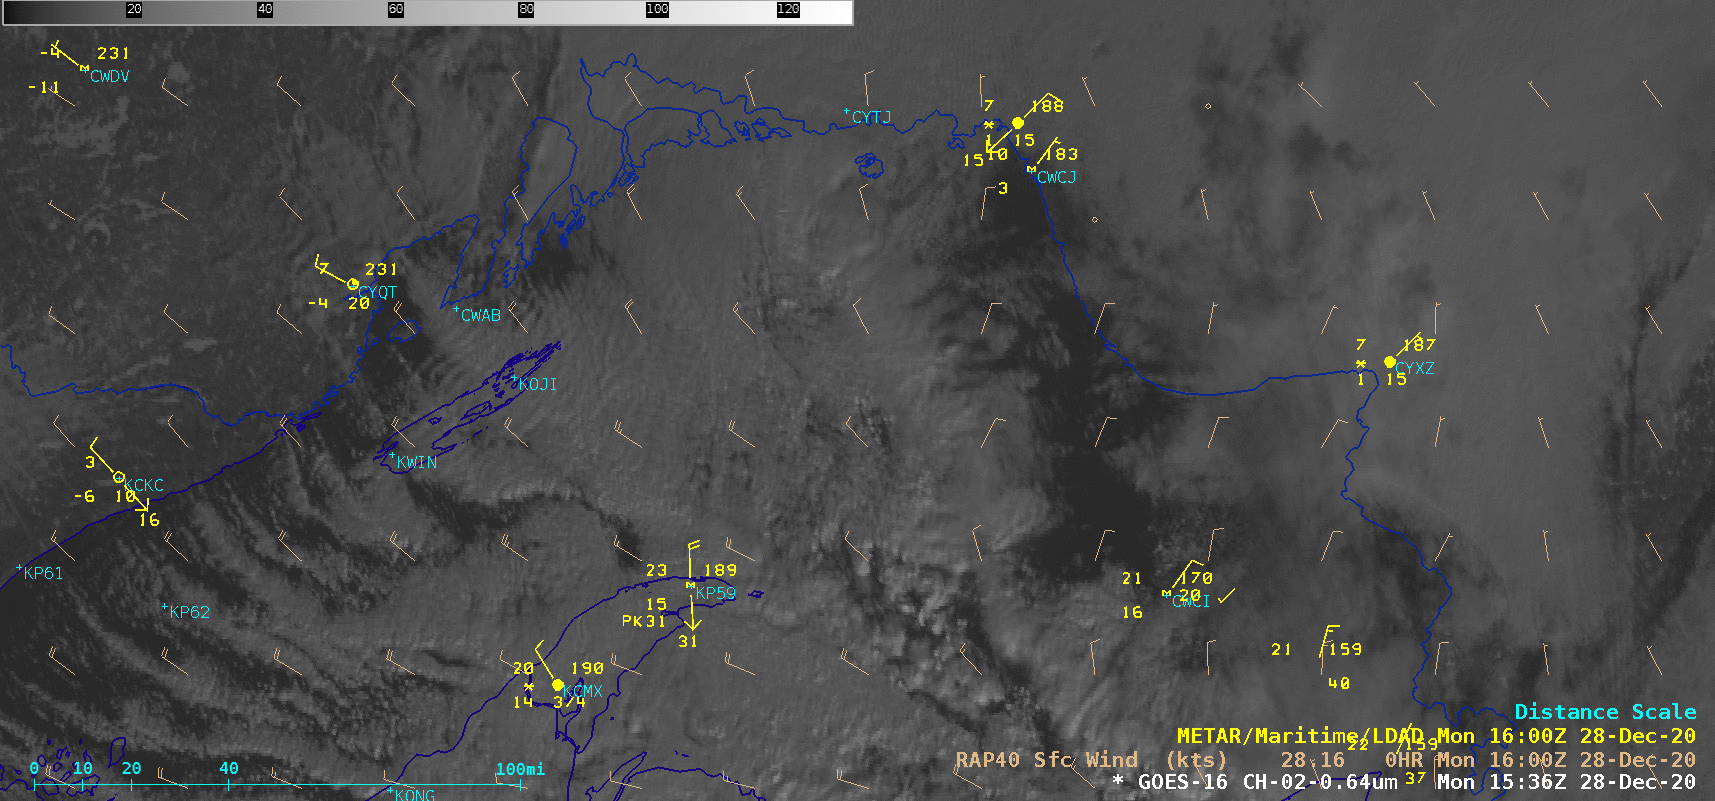 GOES-16 Visible mage, with an overlay of Metop ASCAT surface scatterometer winds [click to enlarge]